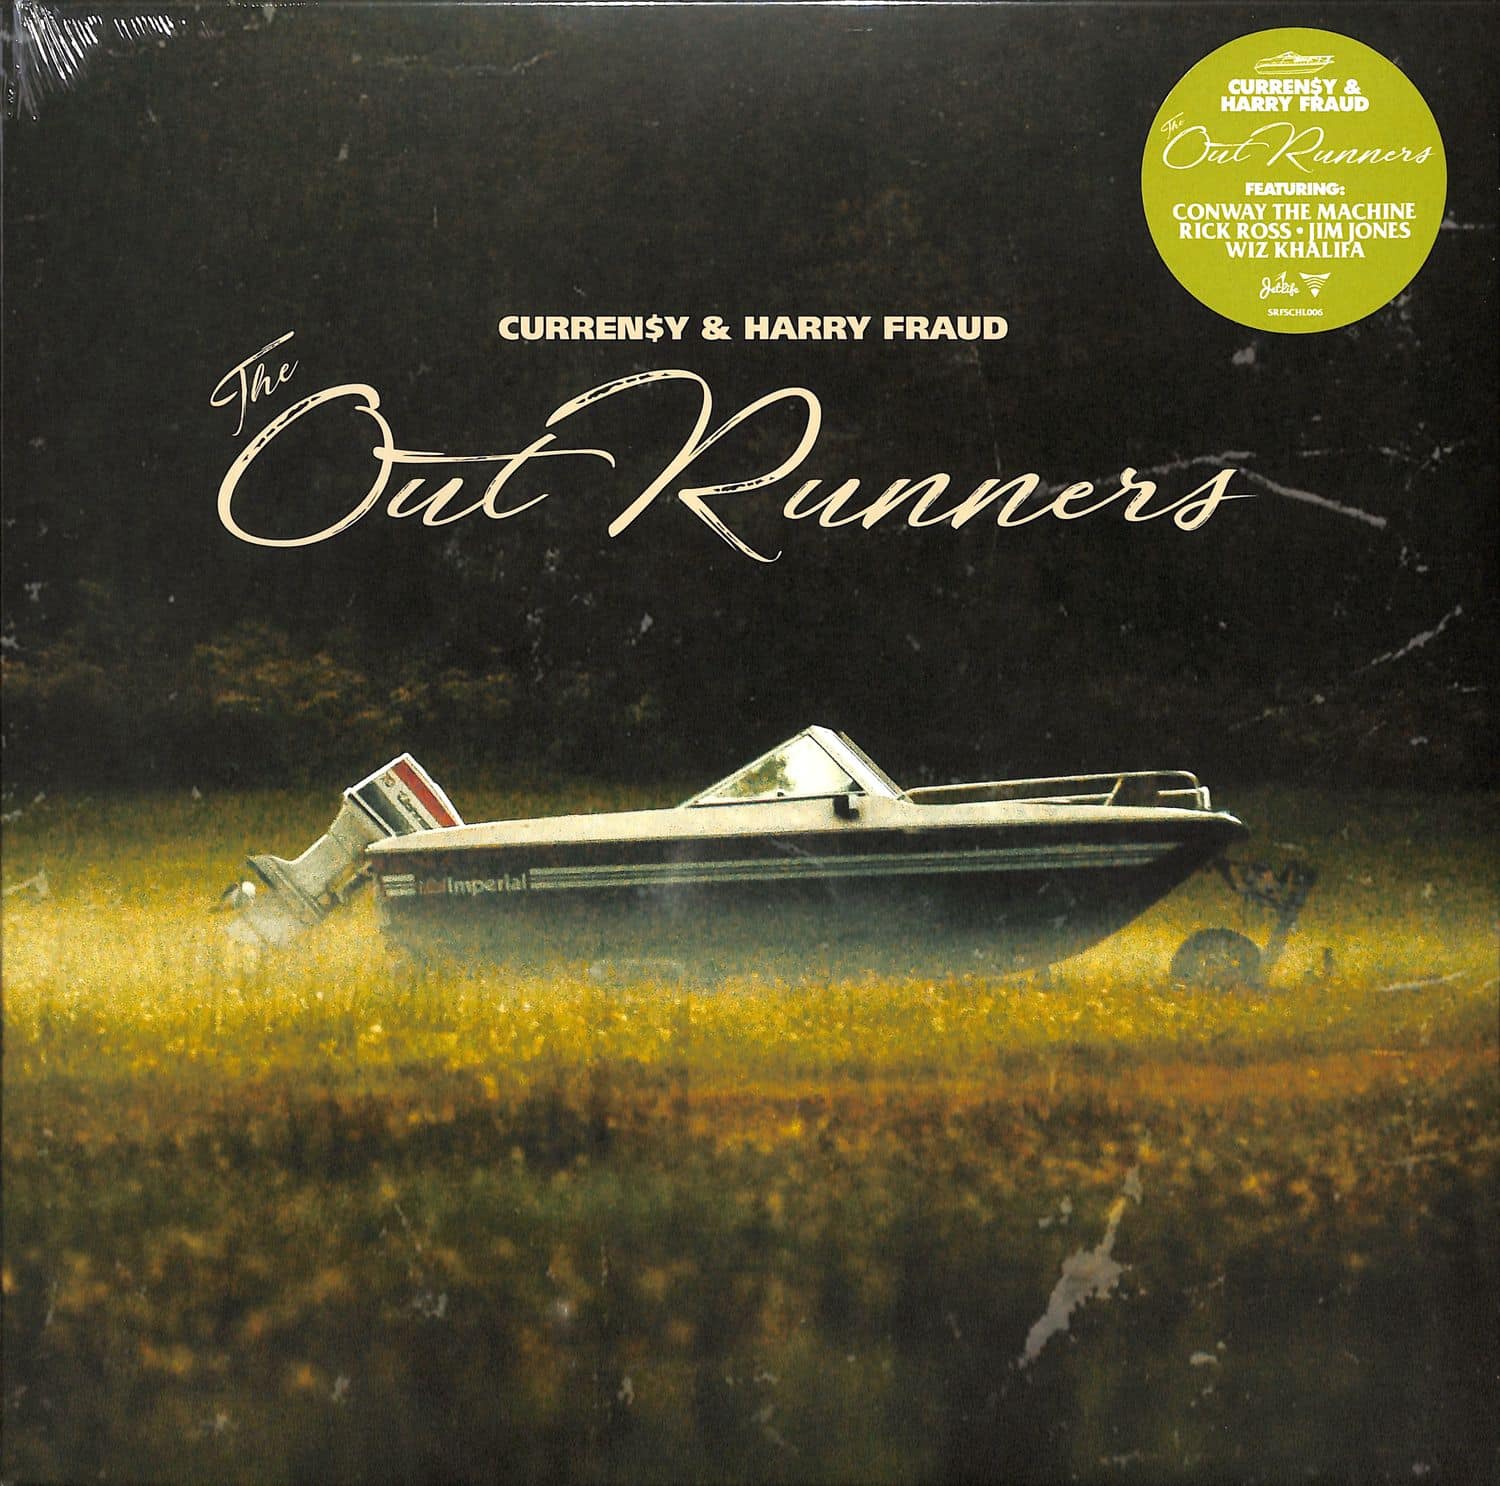 Currensy & Harry Fraud - THE OUTRUNNERS 